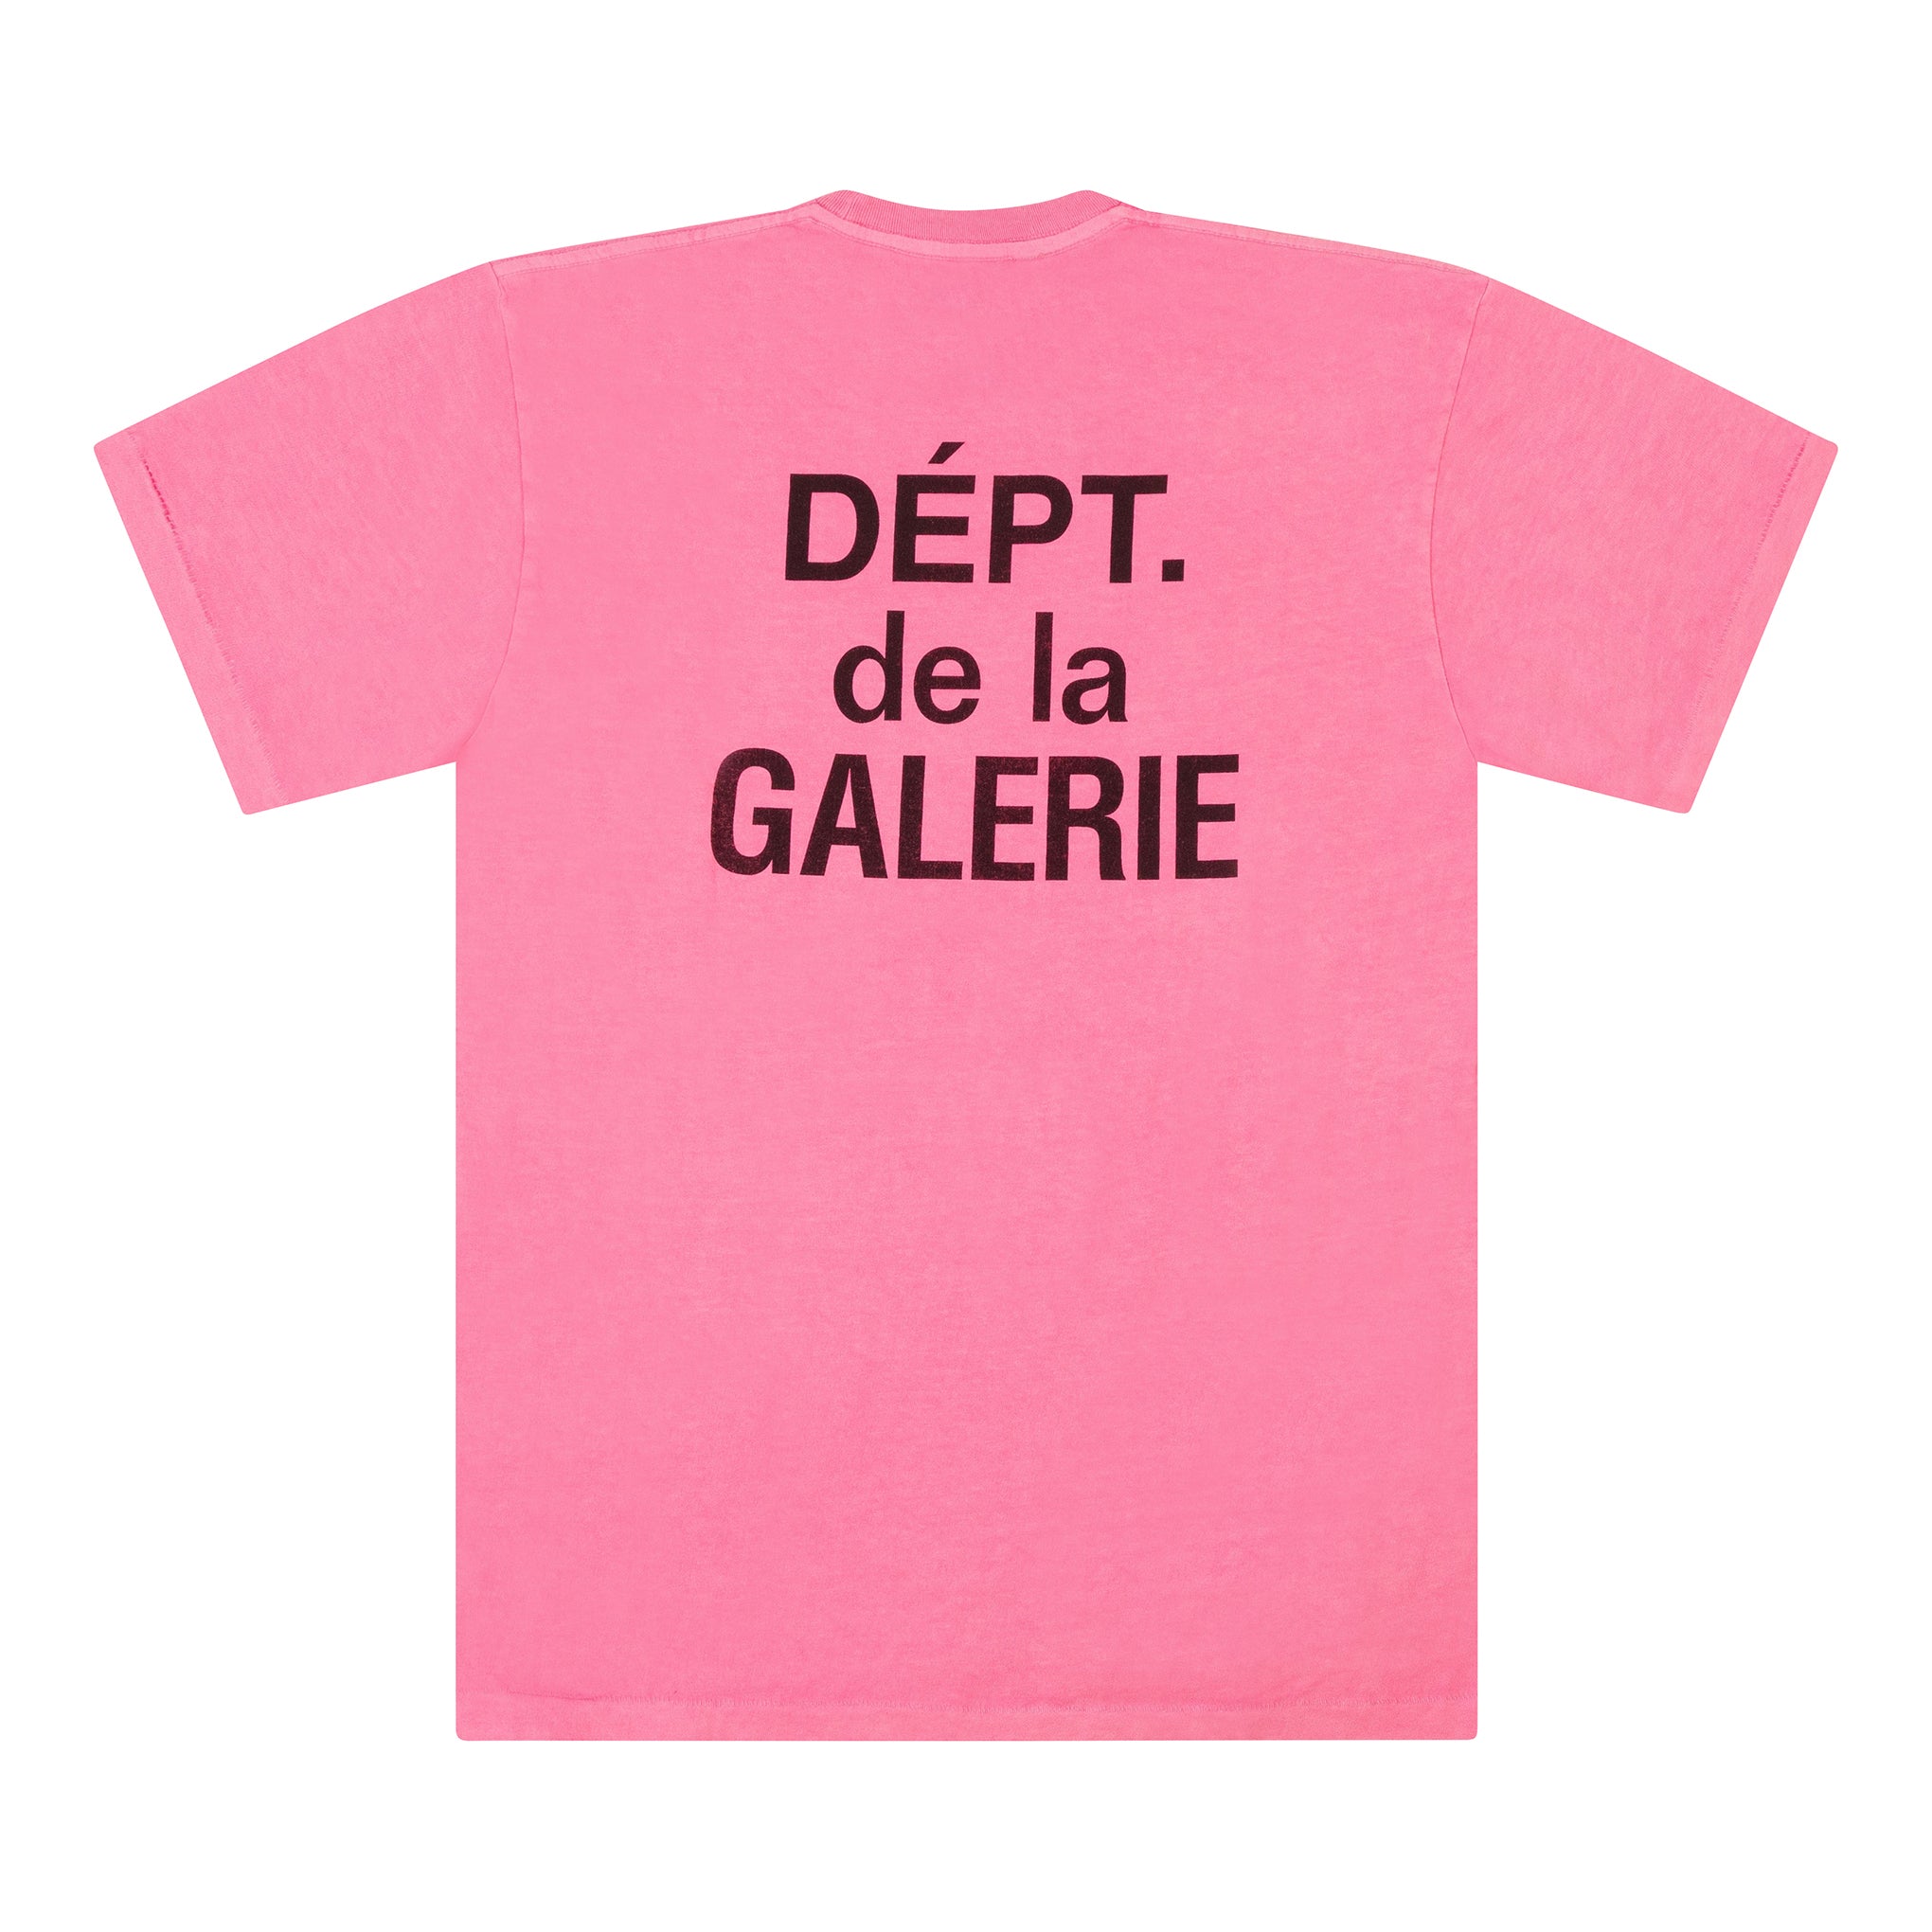 GALLERY DEPT. FRENCH TEE FLO PINK